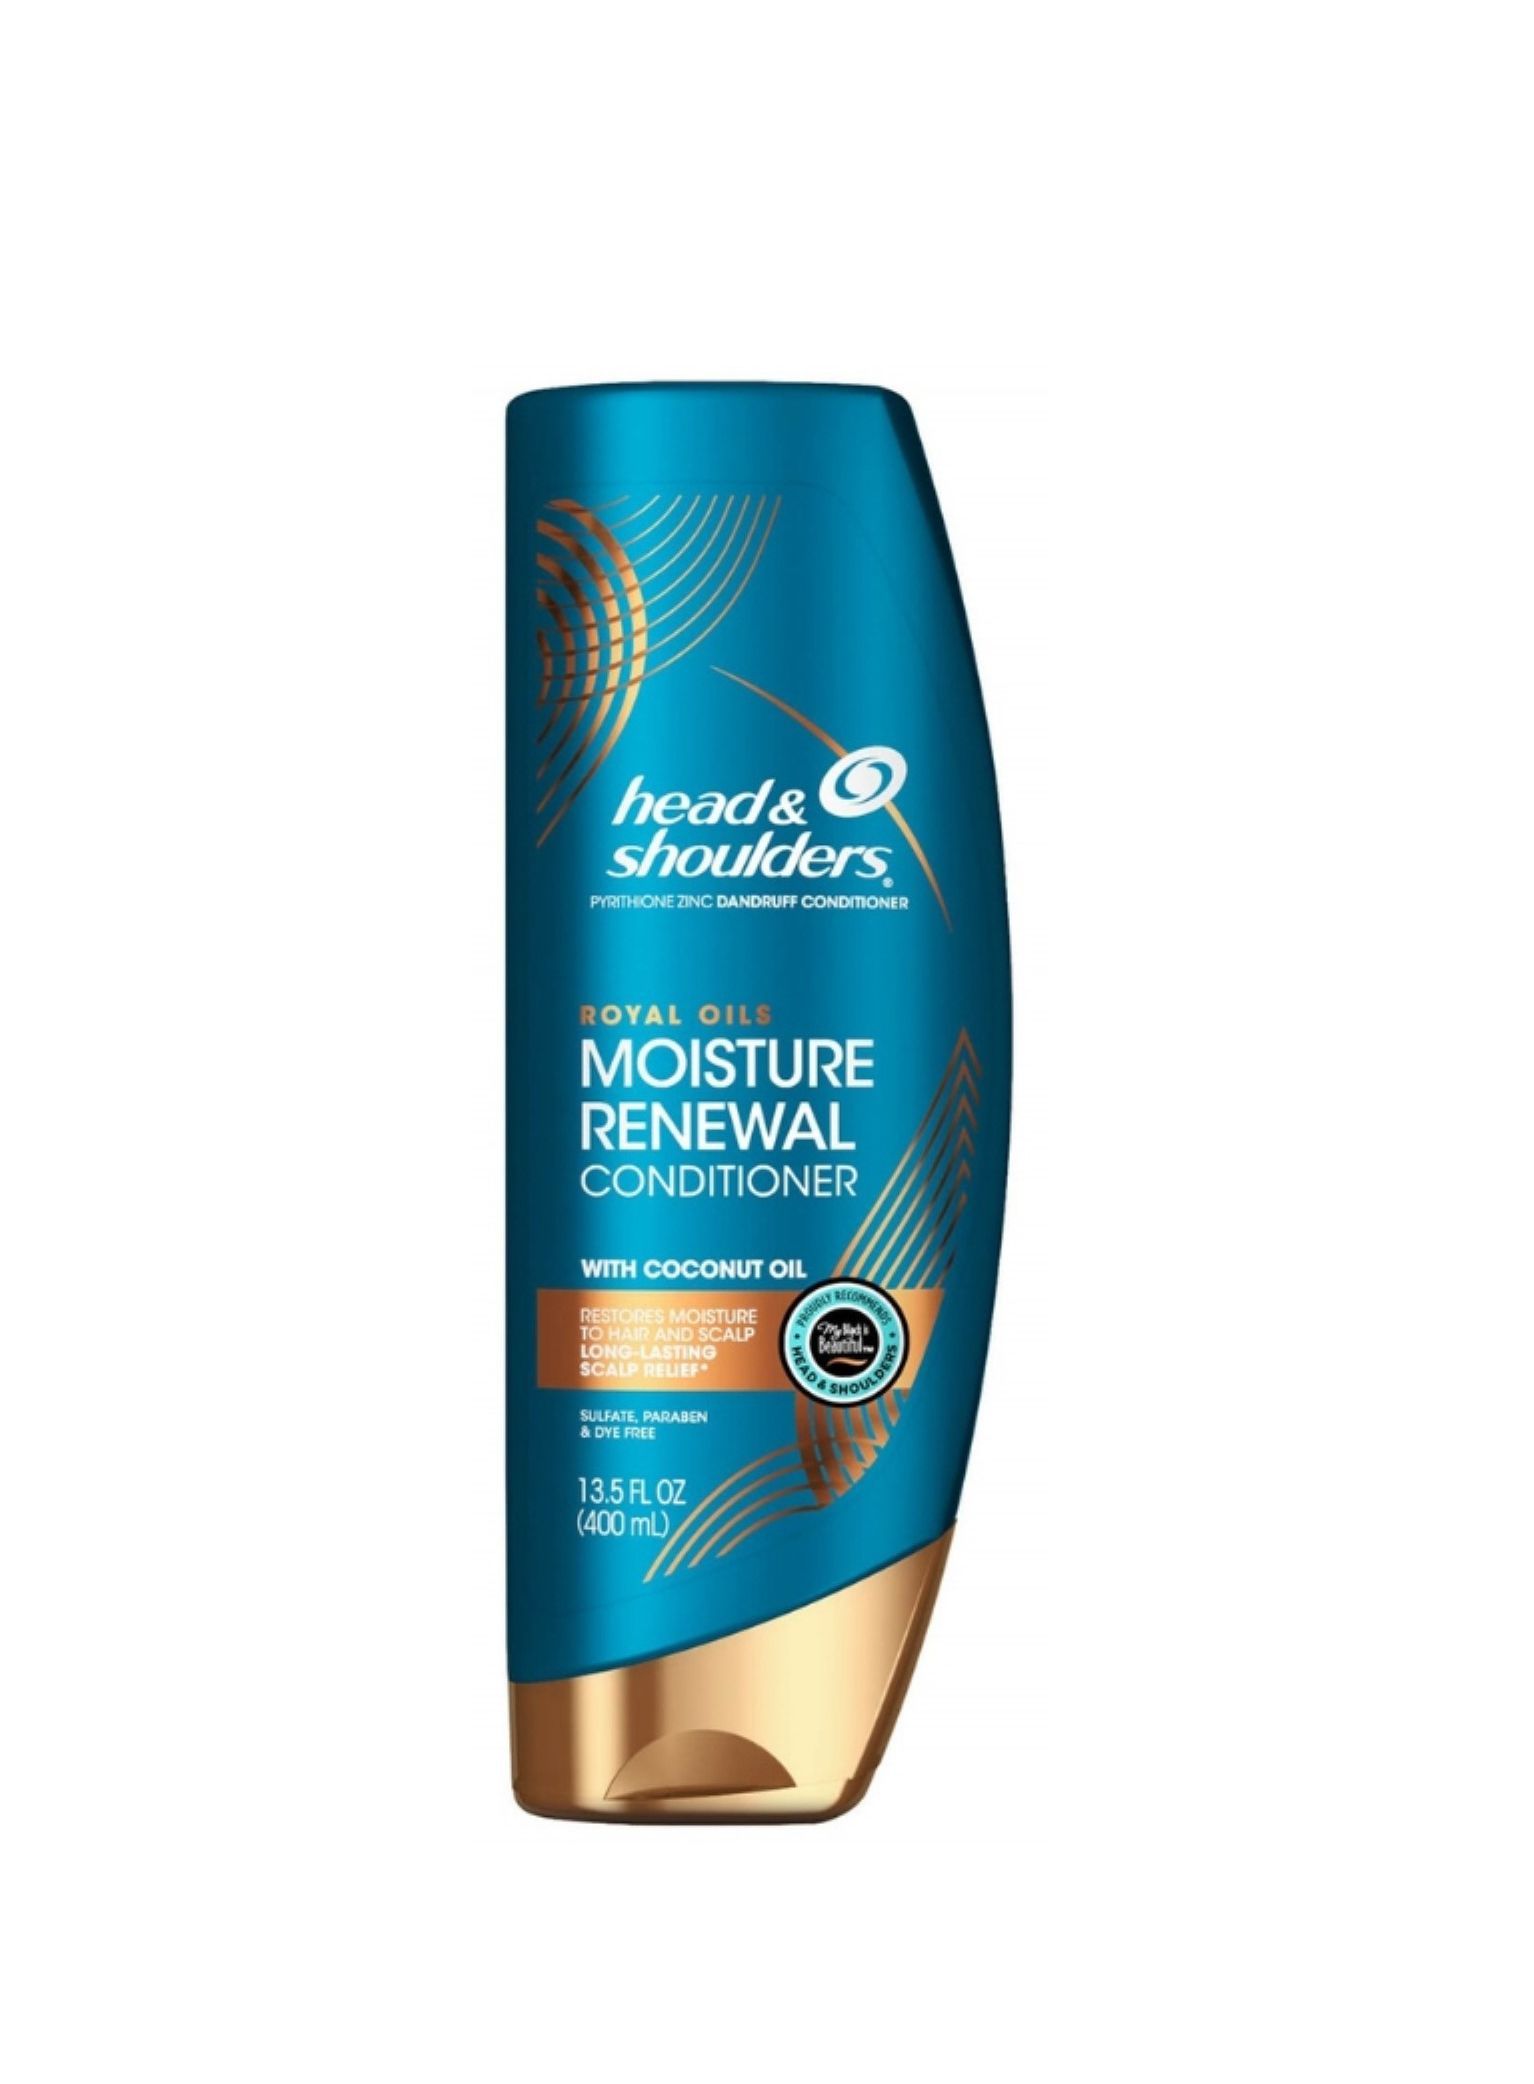 Royal Oils Moisture Renewal Conditioner with Coconut Oil